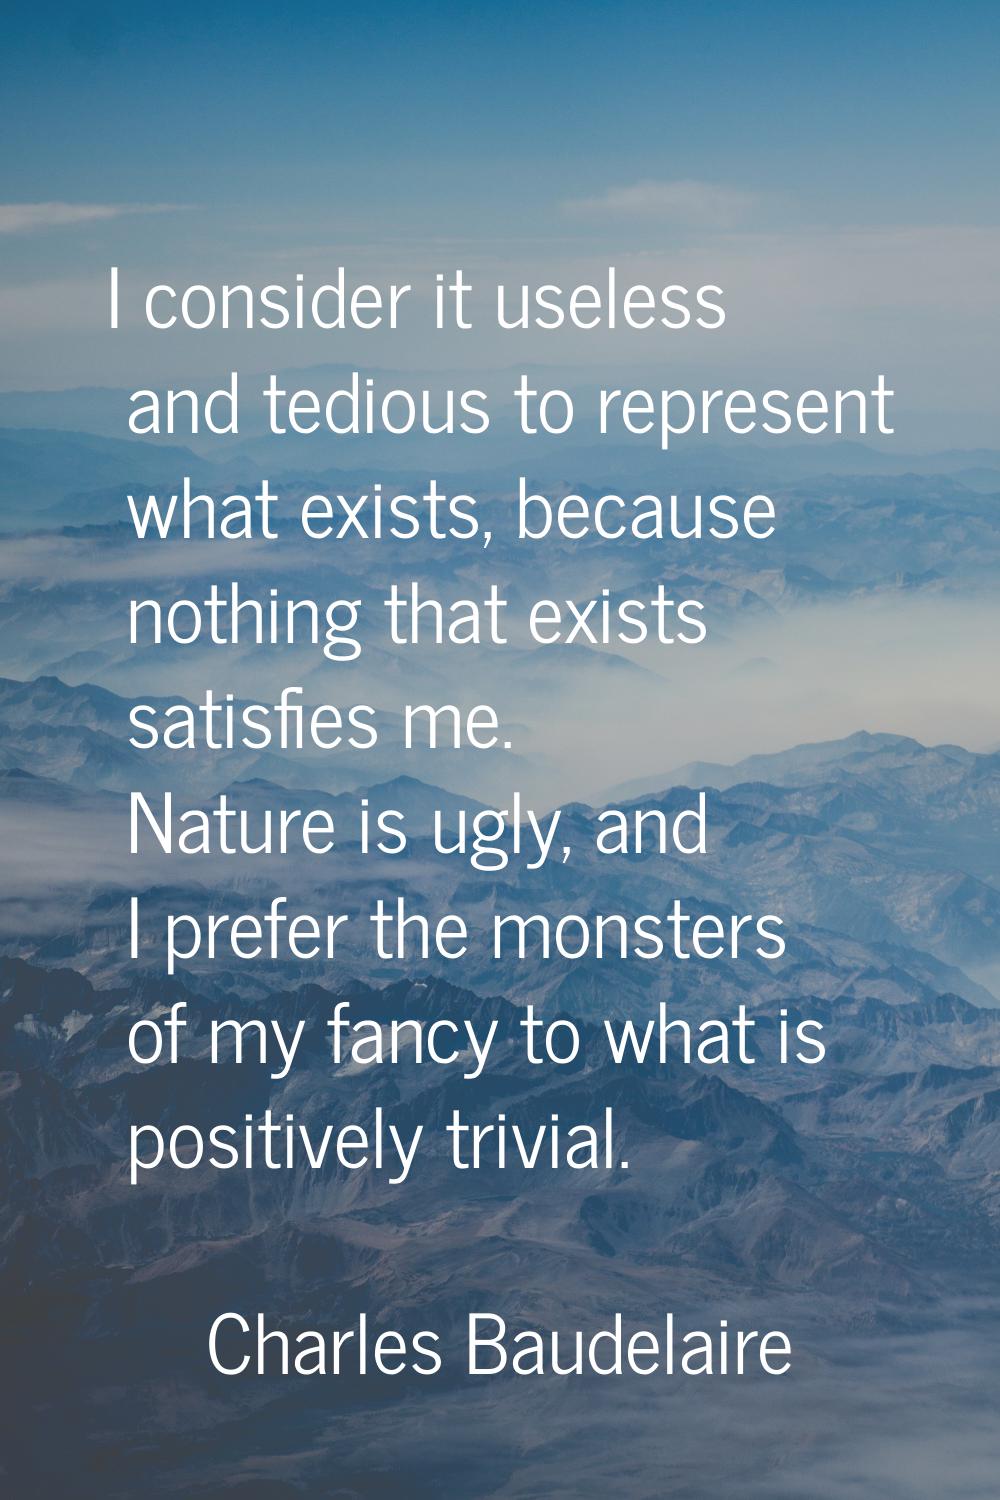 I consider it useless and tedious to represent what exists, because nothing that exists satisfies m